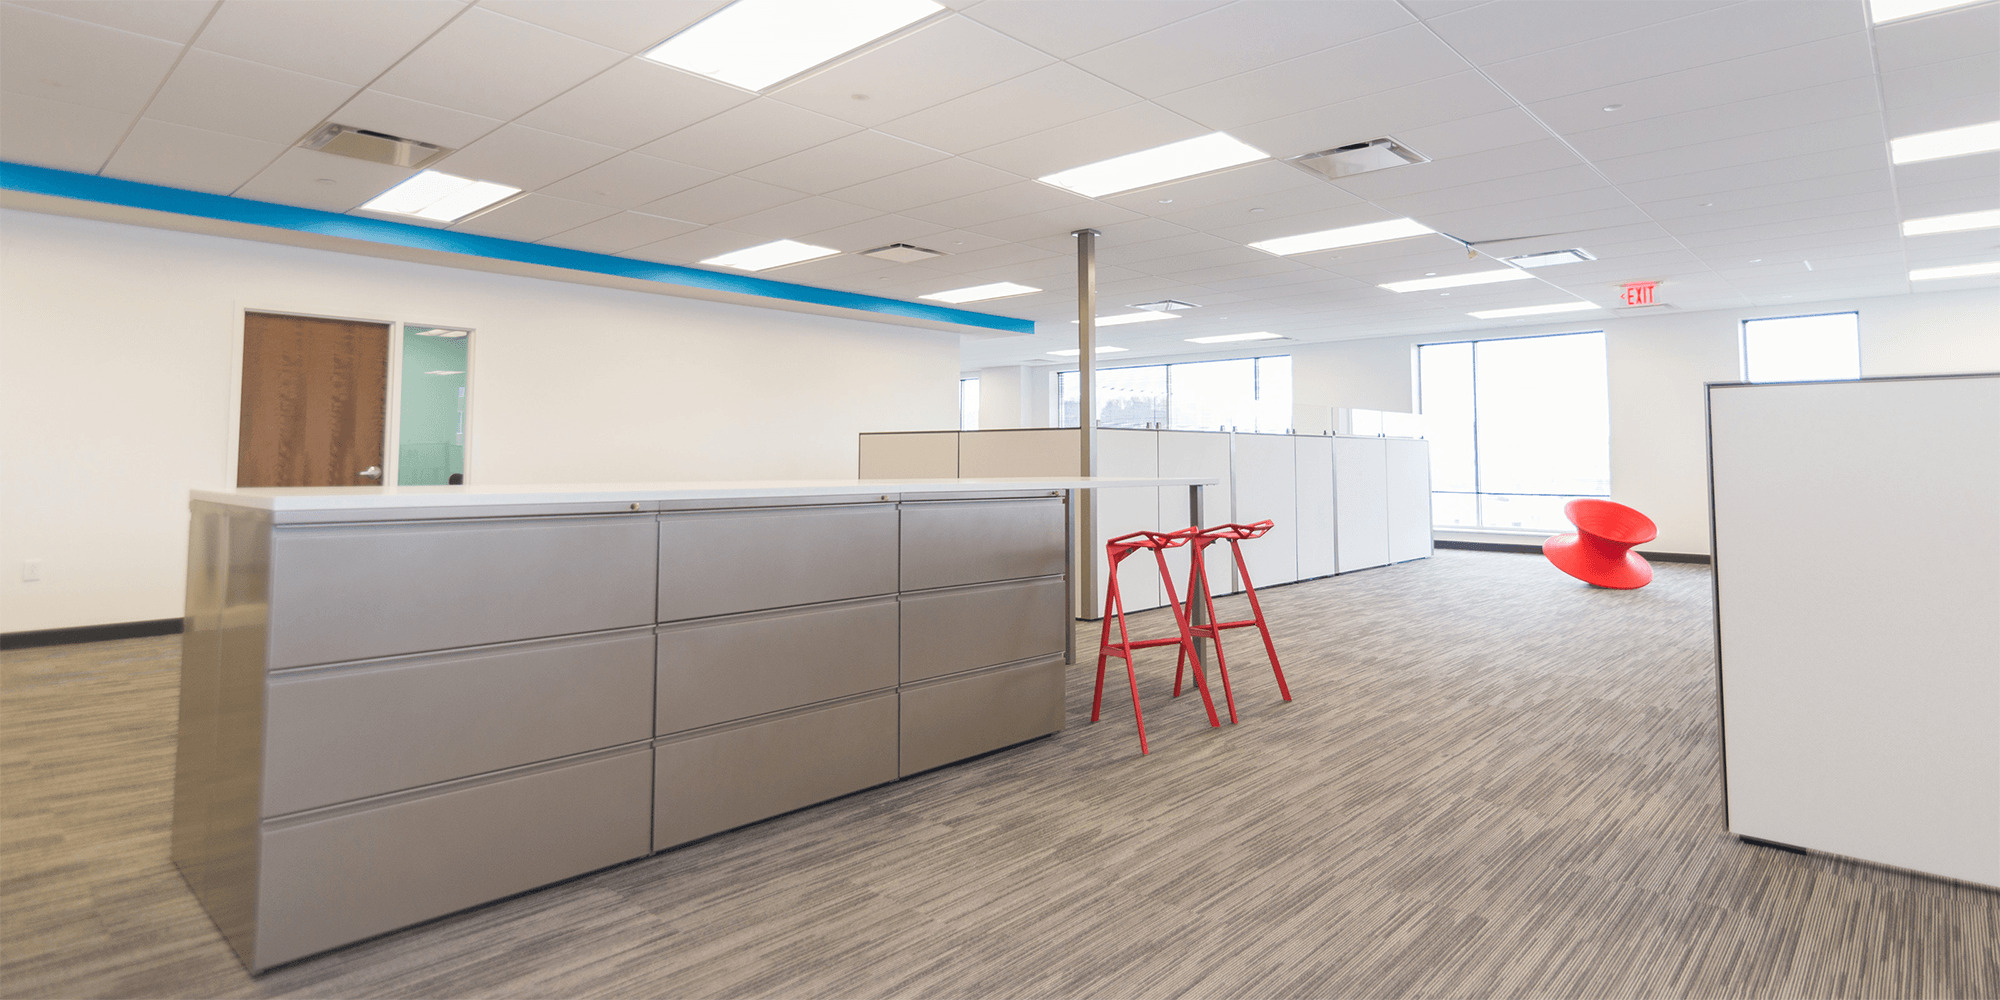 large open office area with storage drawers, cubicles, and a spinning axis chair